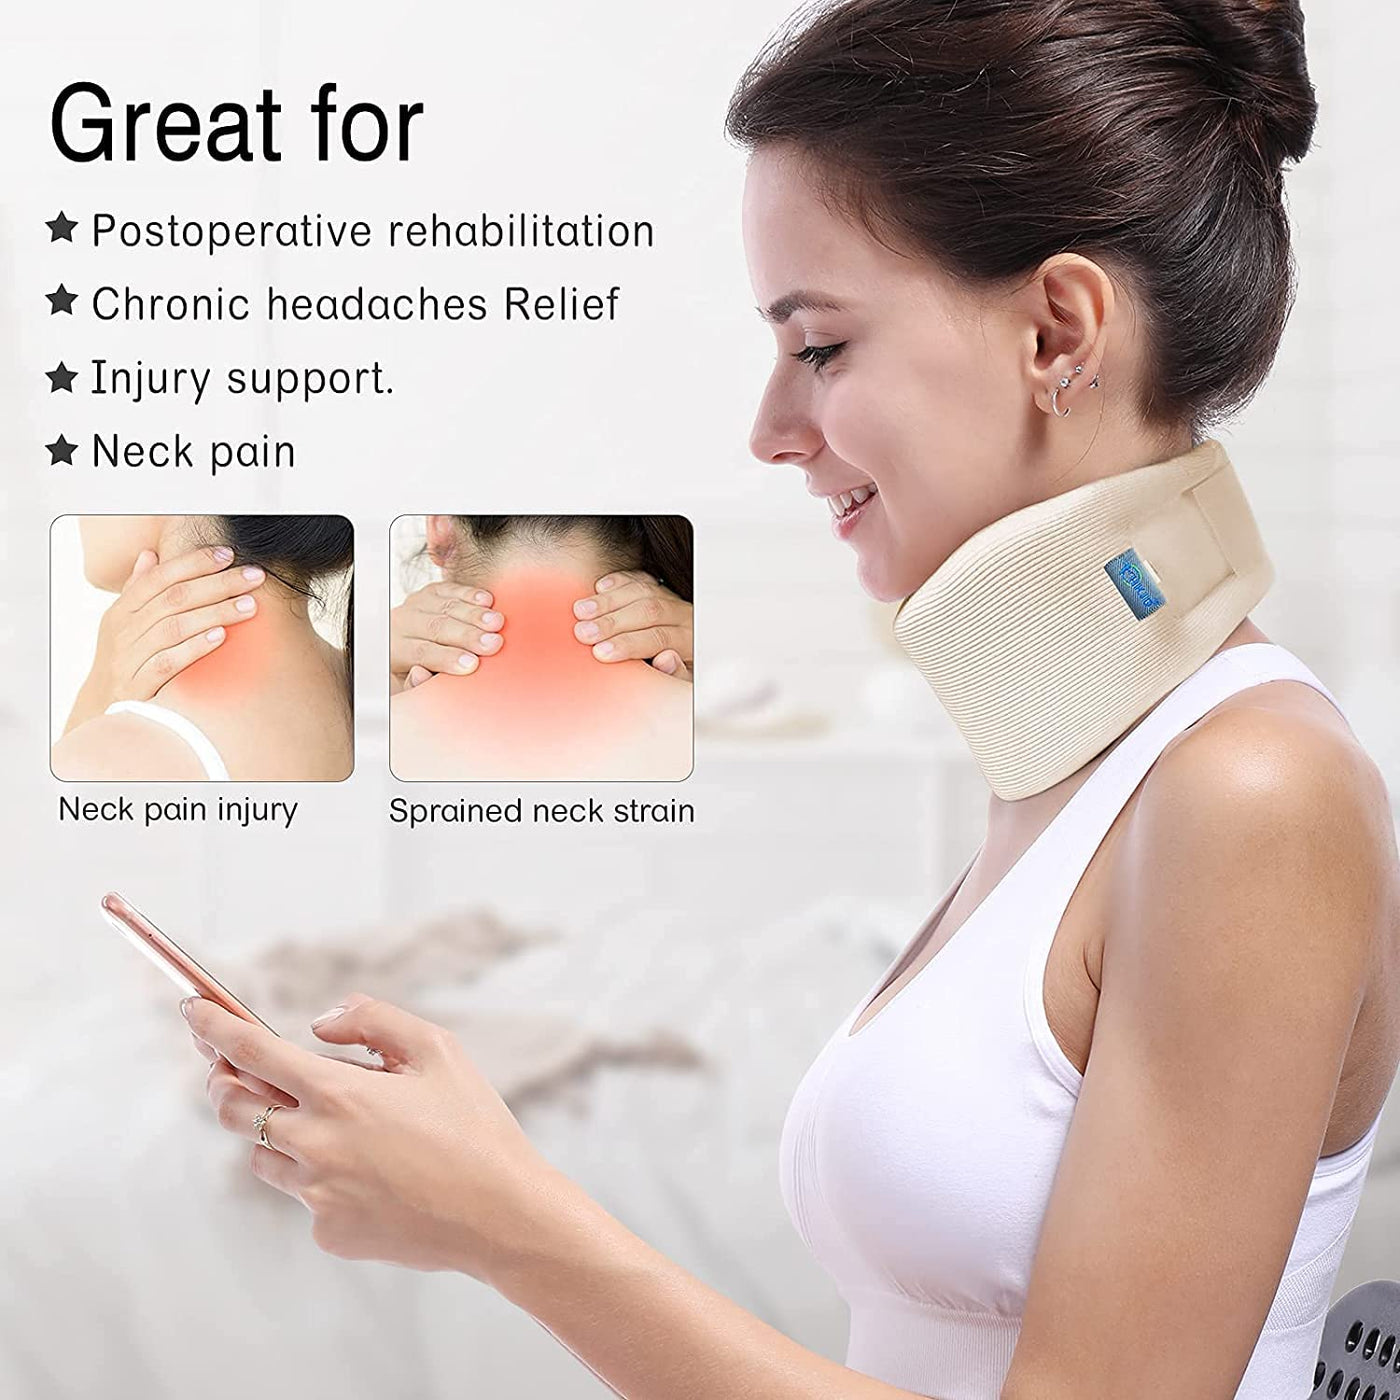  Soft Foam Neck Brace Universal Cervical Collar, Adjustable Neck  Support Brace For Sleeping - Relieves Neck Pain And Spine Pressure, Neck  Collar After Whiplash Or Injury